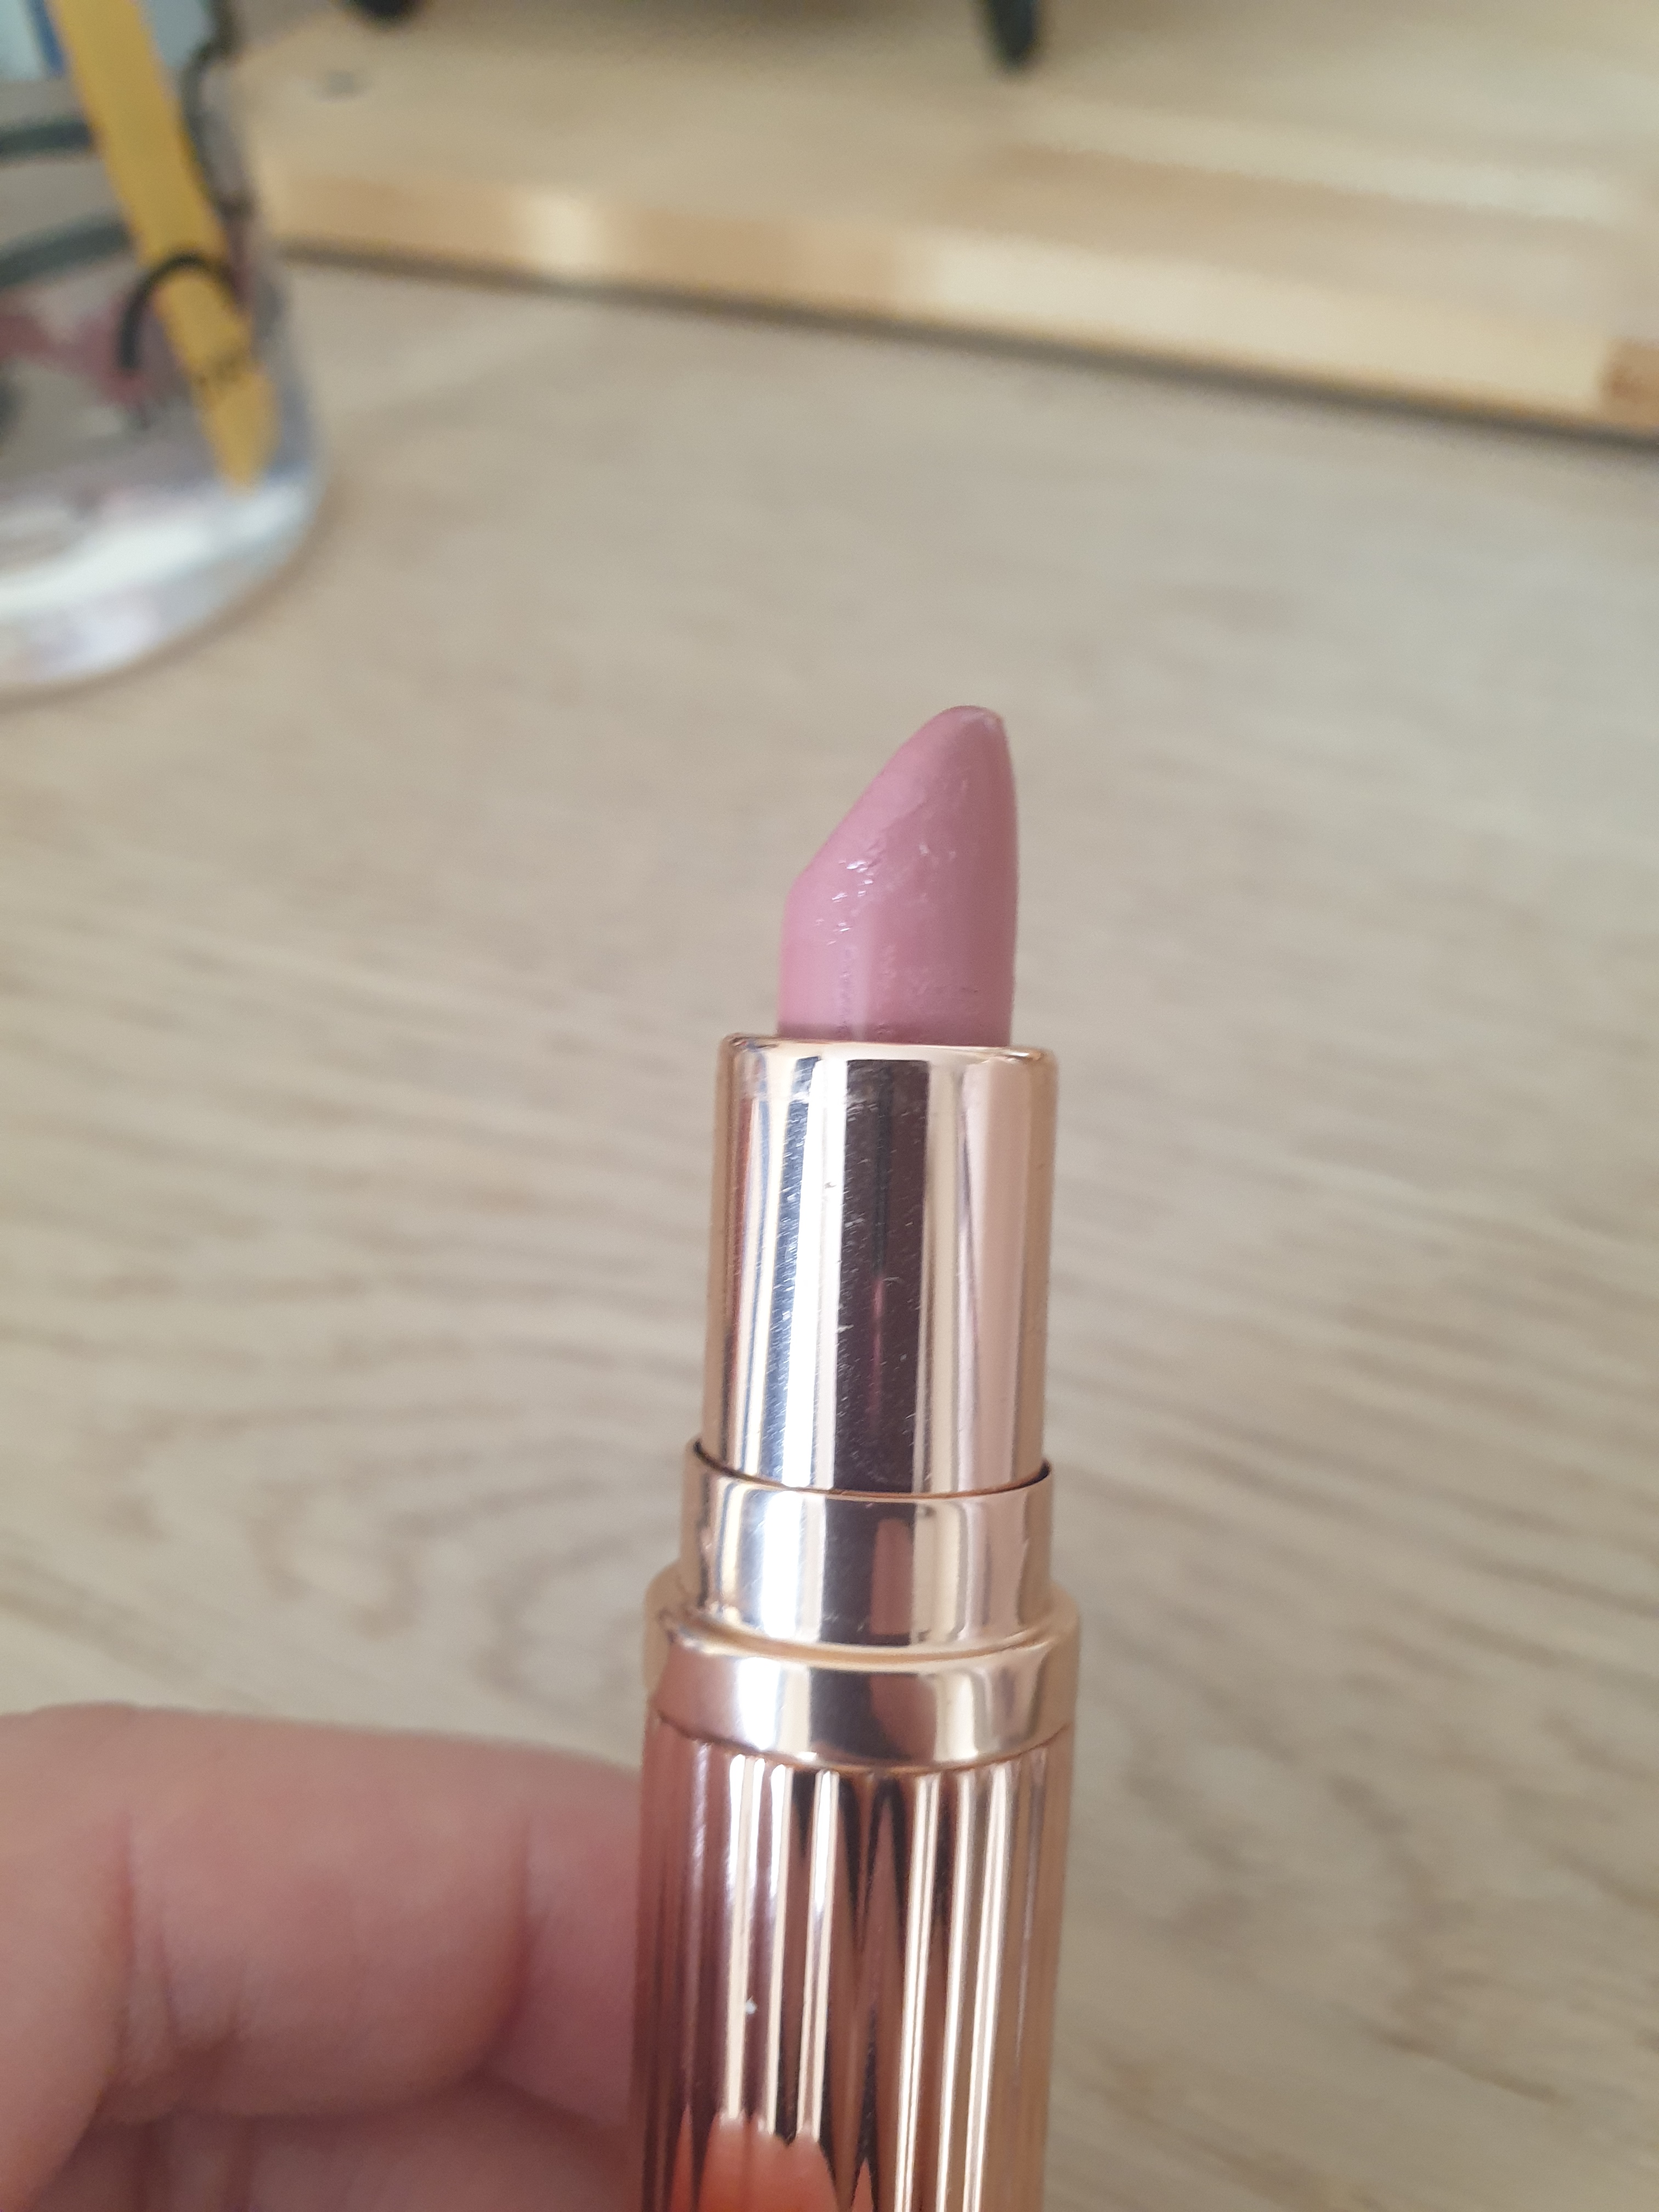 Make up product - Pastel pink lipstick in gold packaging